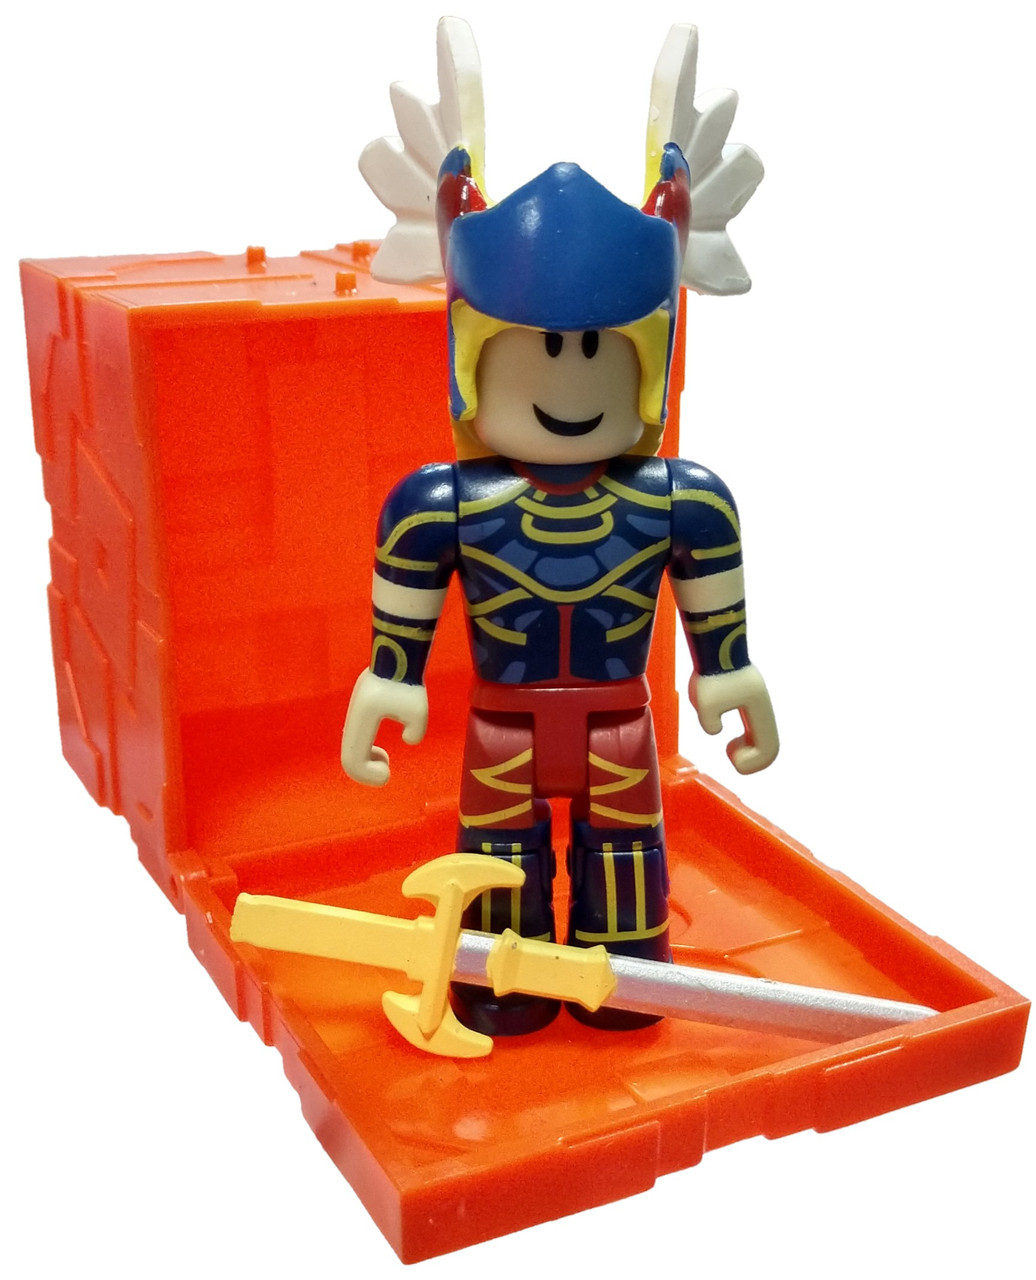 Roblox Series 6 Summoner Tycoon Valkyrie 3 Mini Figure With Orange Cube And Online Code Loose Jazwares Toywiz - roblox valkyrie toy code